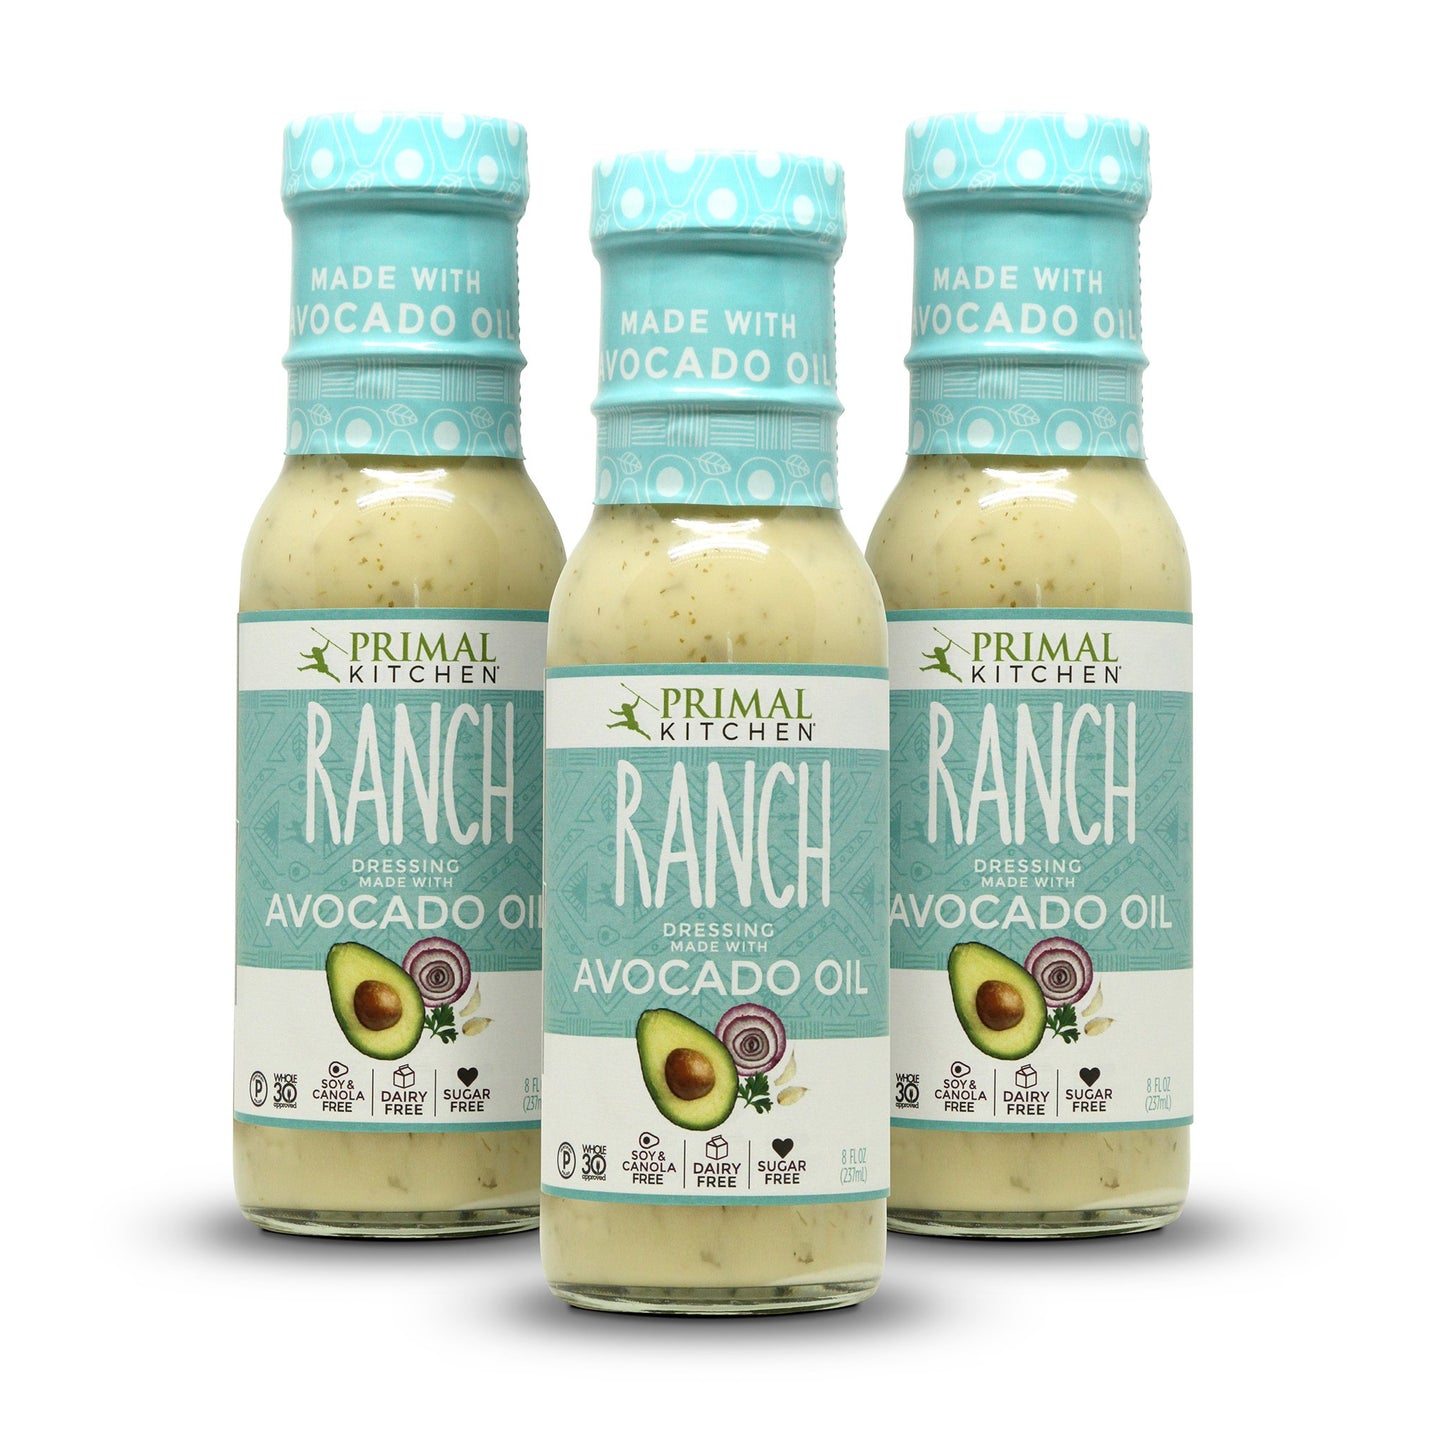 Primal Kitchen Ranch Dressing with Avocado Oil - 3-Pack